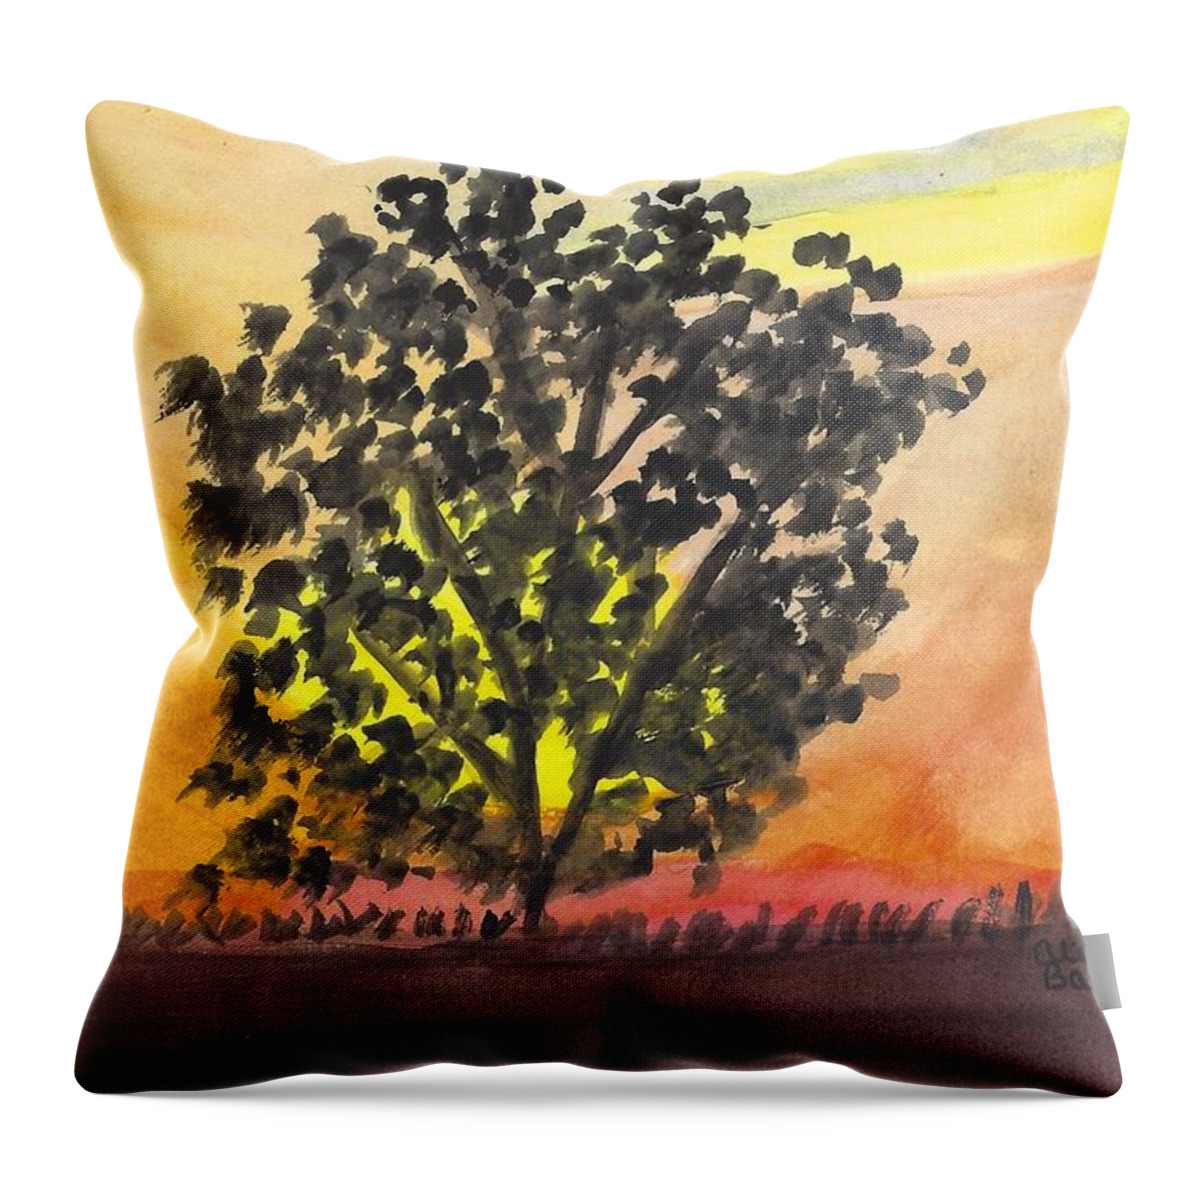 Watercolor Throw Pillow featuring the painting Serenity by Ali Baucom